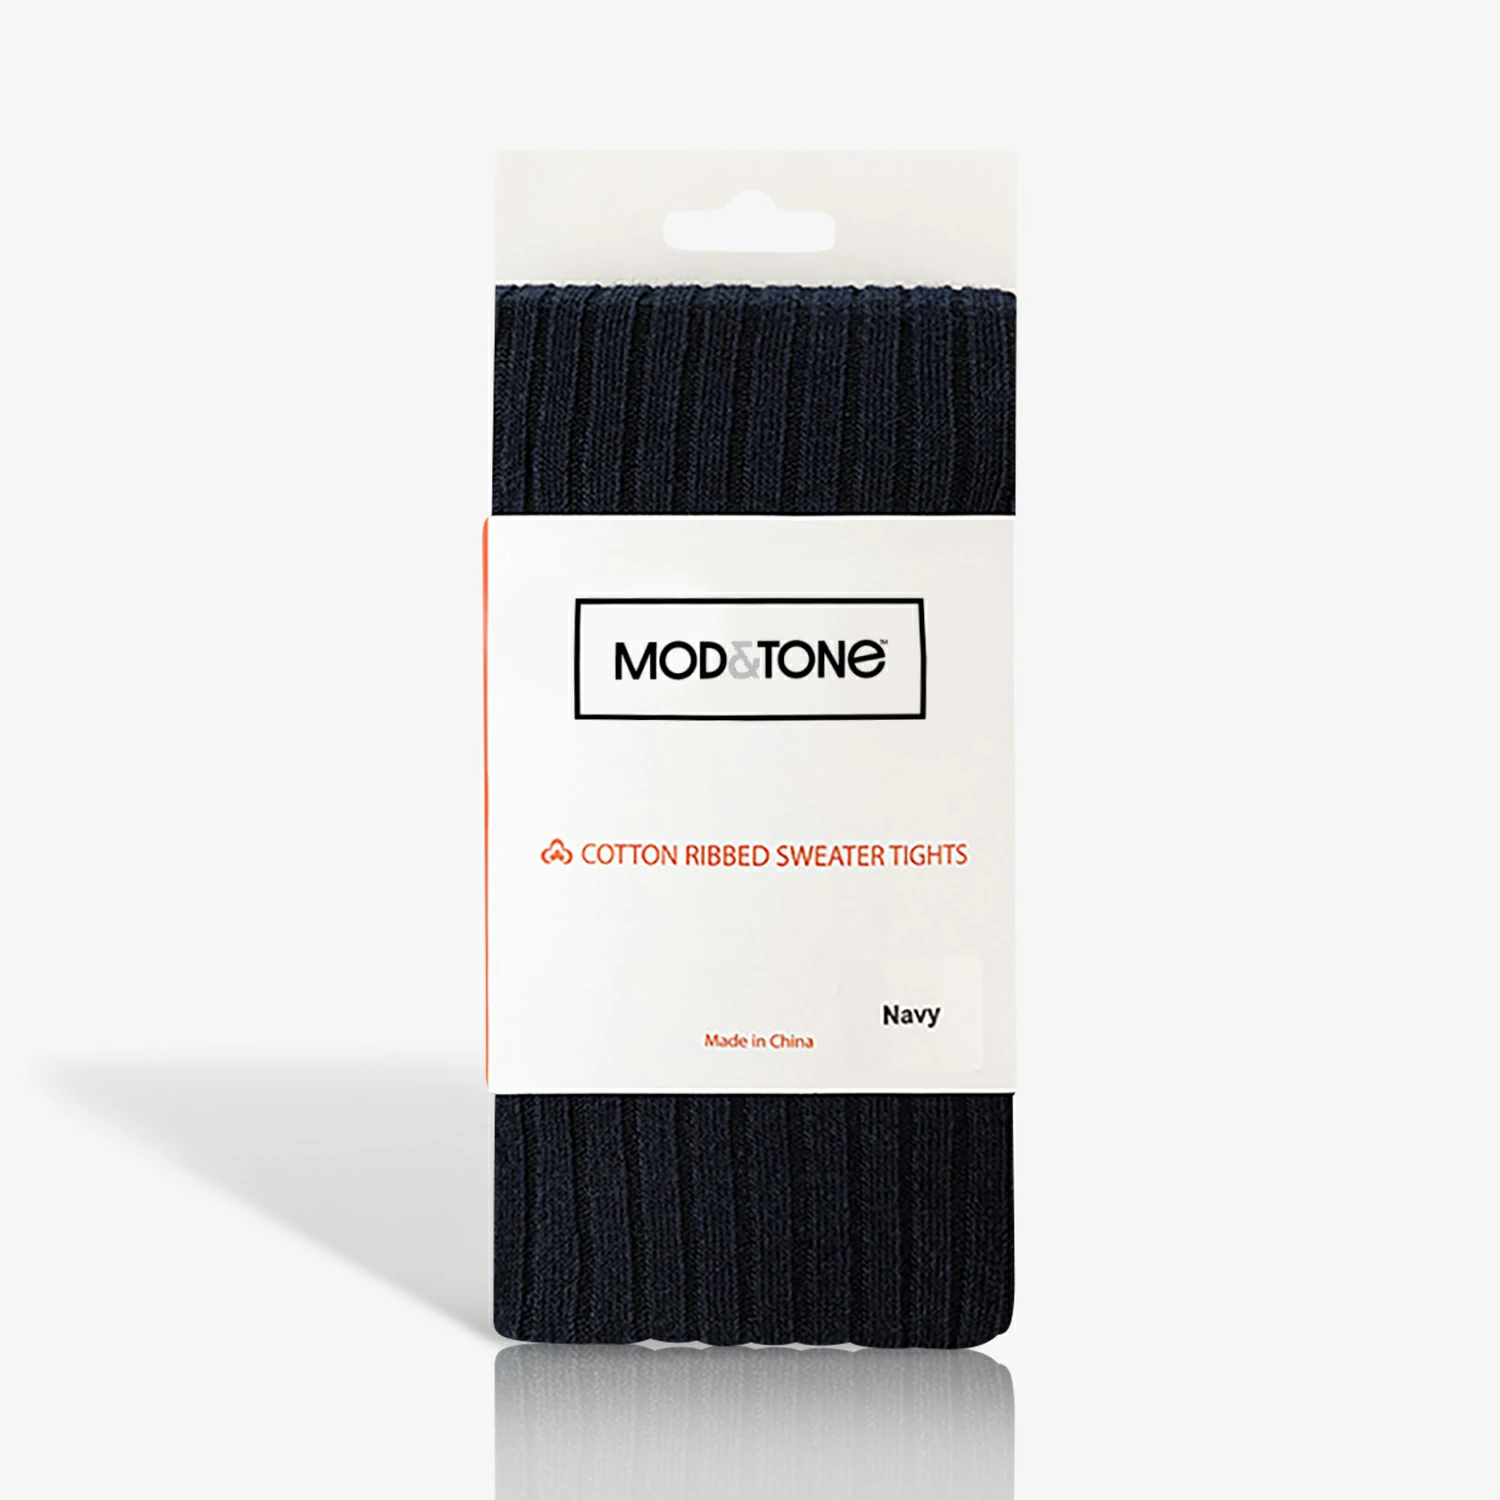 Mod&Tone 2 Pack Cotton Ribbed Sweater Tights - navy.